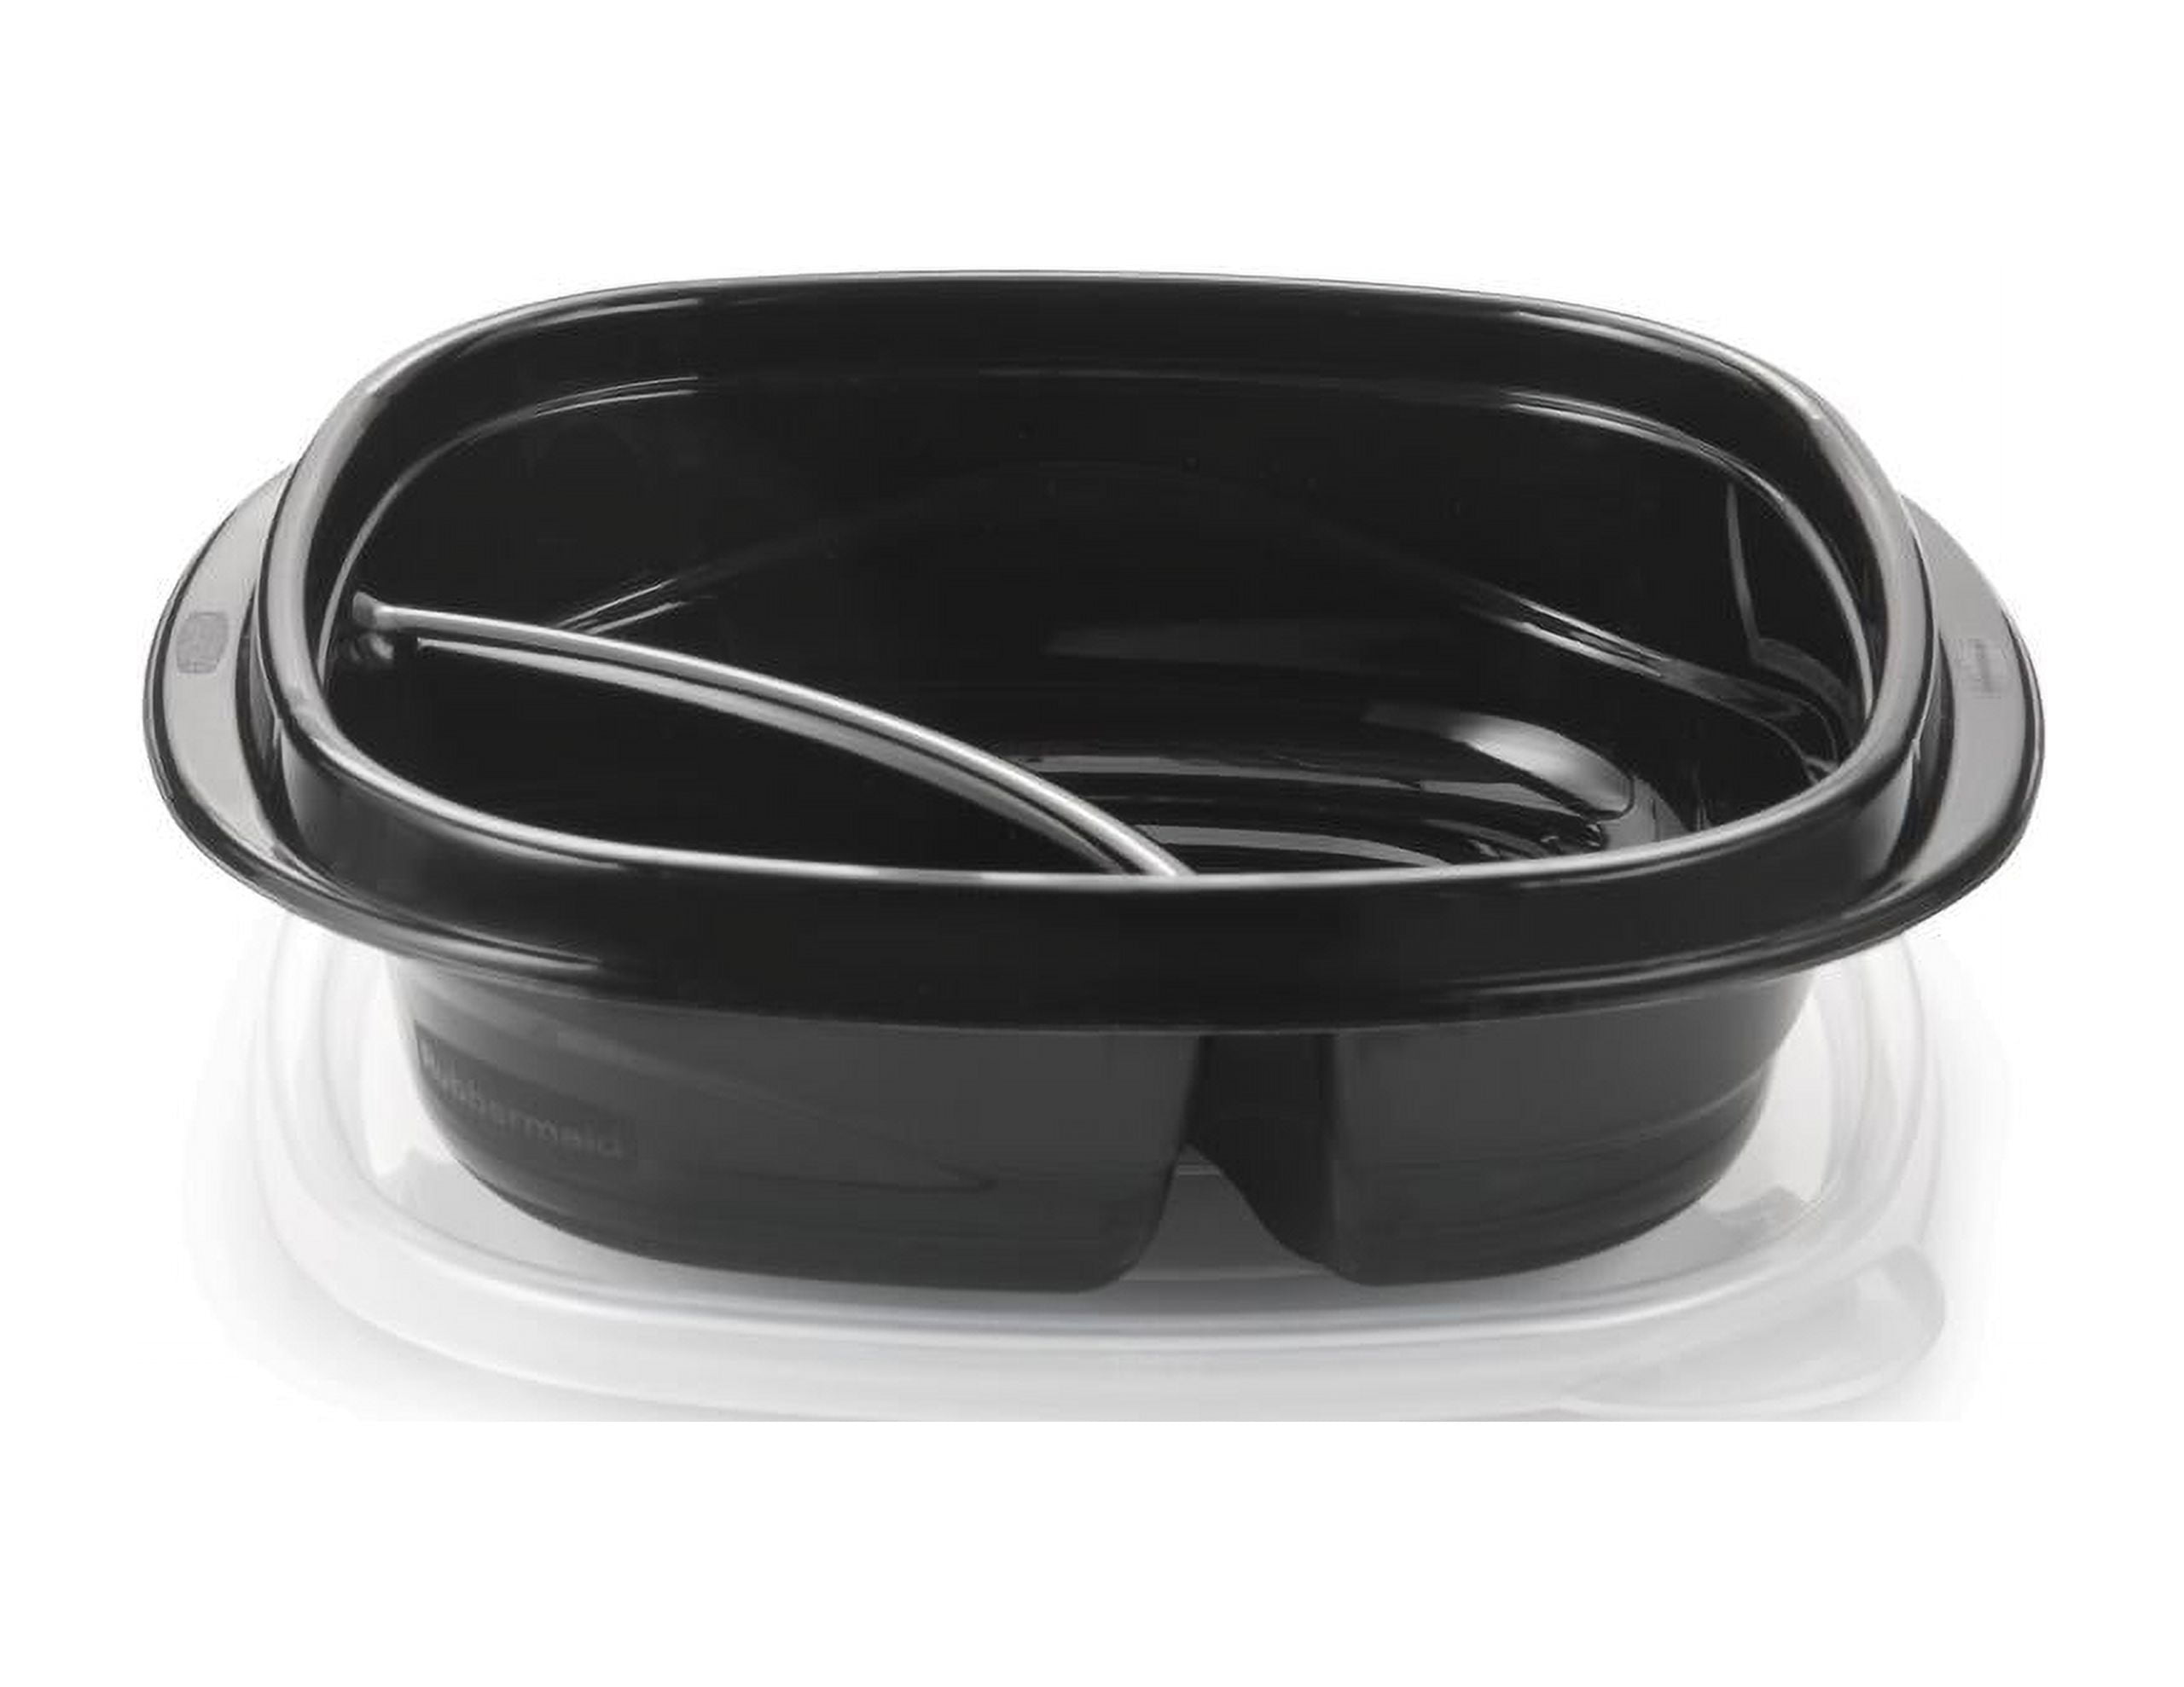 Rubbermaid 20-Piece TakeAlongs Meal Prep Containers - 2030326